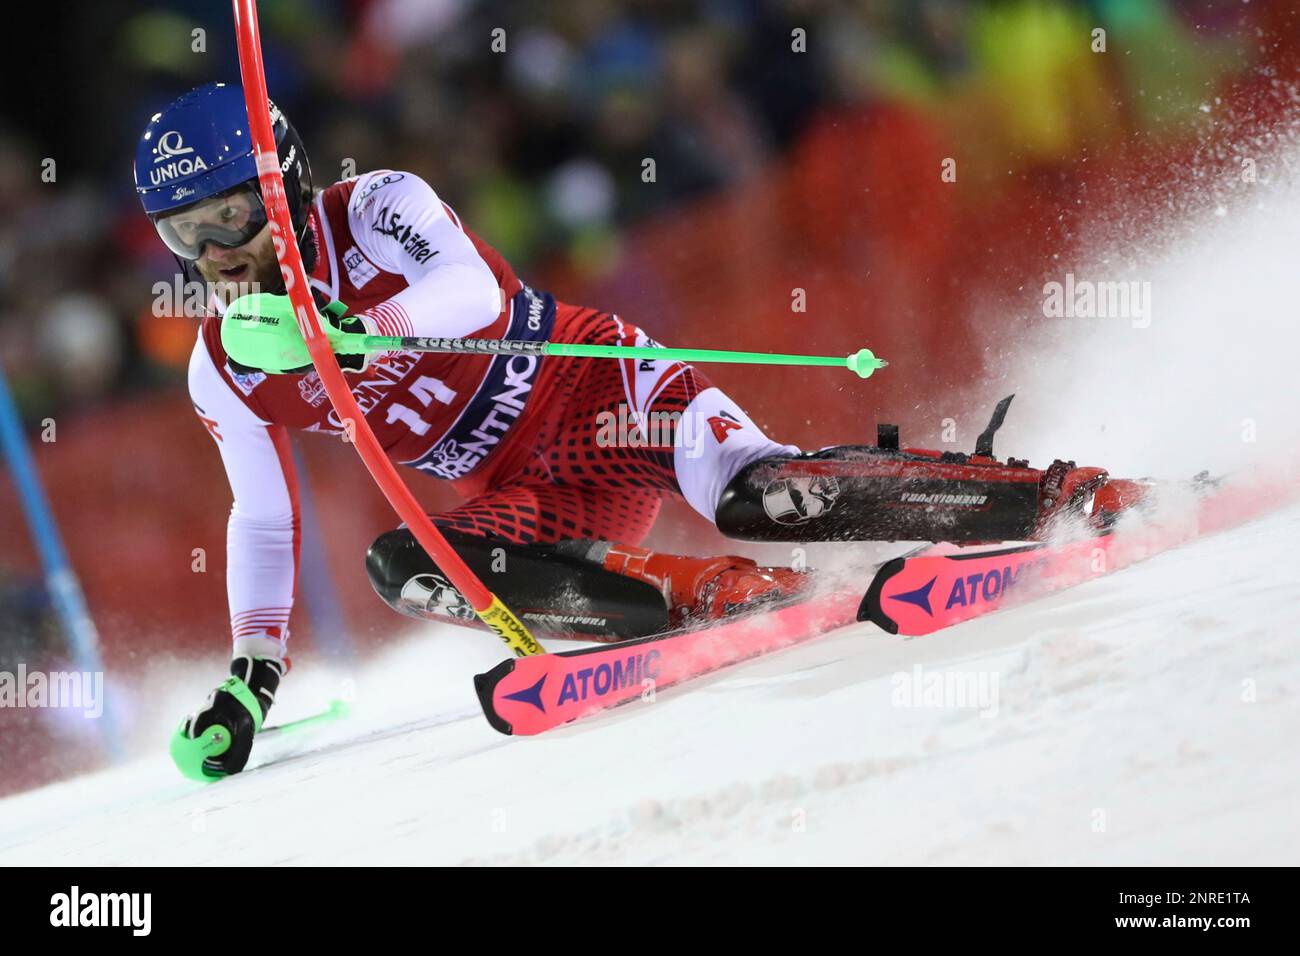 FIS Alpine Ski World Cup Mens Night Slalom in Madonna di Campiglio, Italy on January 8, 2020, Marco Schwarz (AUT) in action